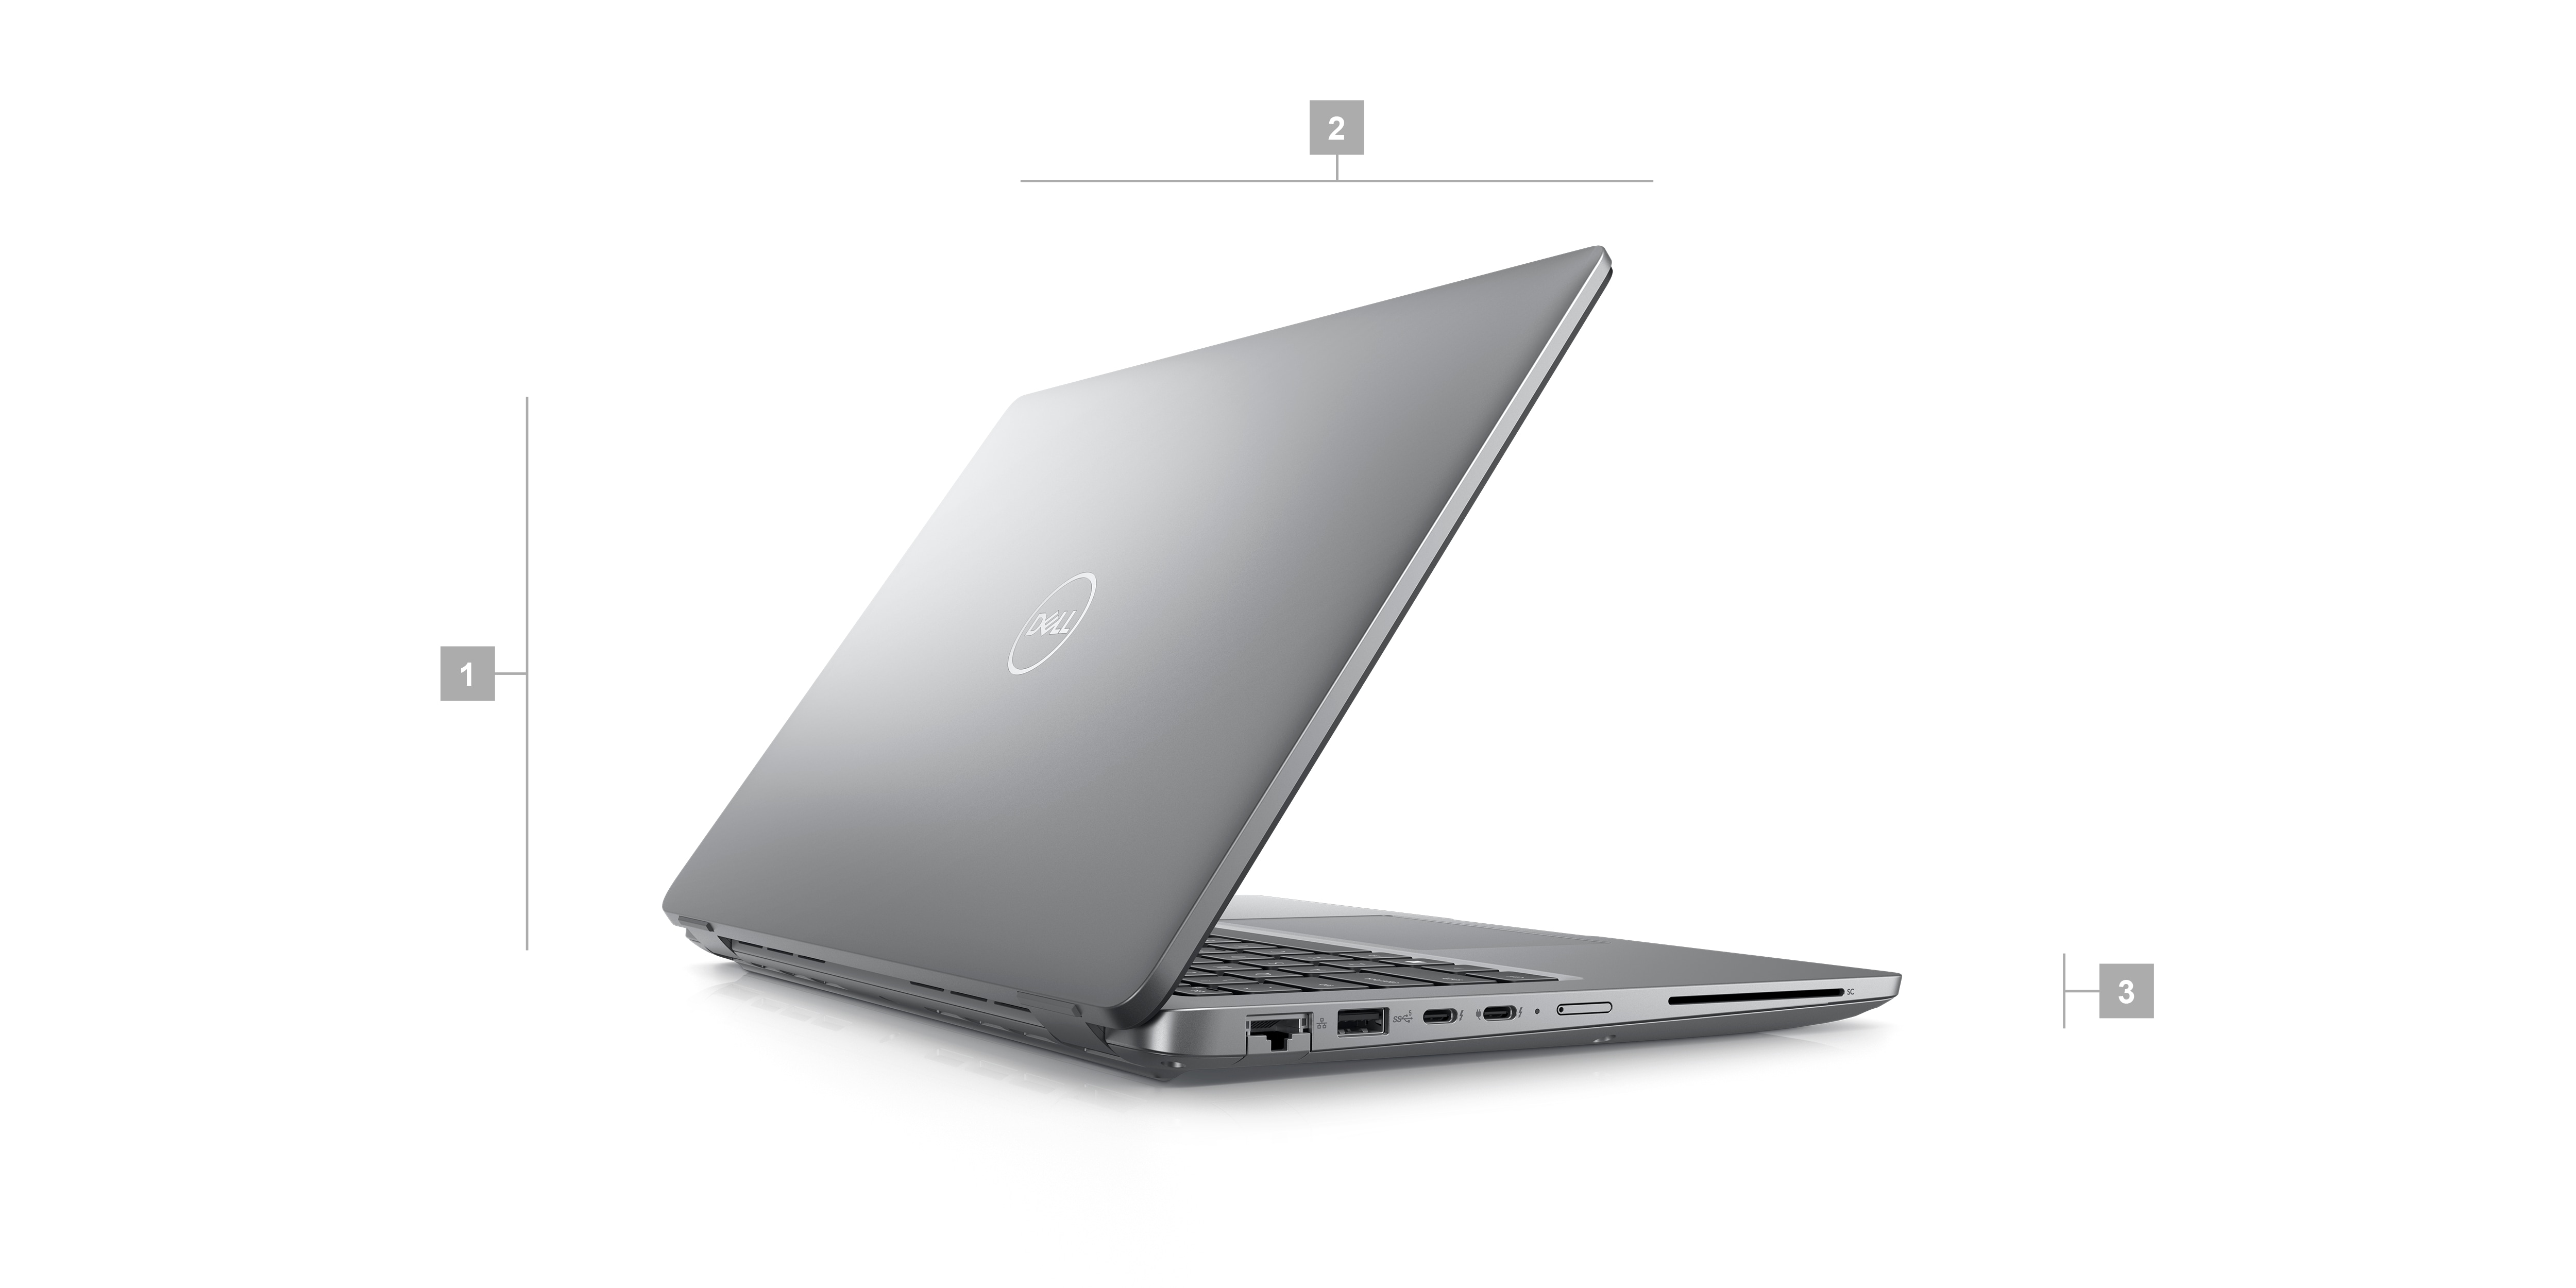 Dell laptop with numbers from 1 to 3 showing the product dimensions and weight. 